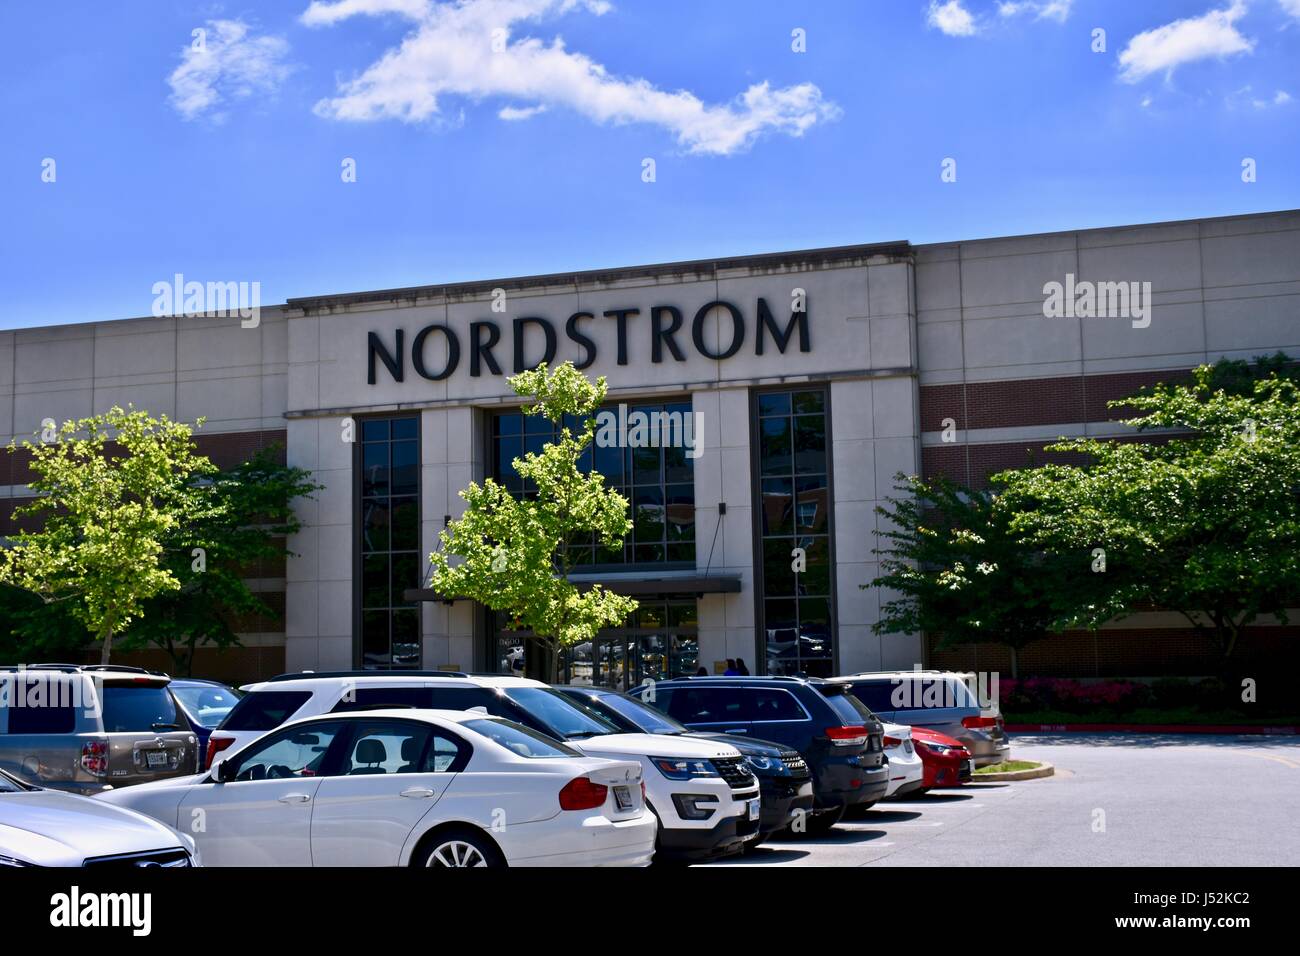 New York's Flagship Nordstrom to Debut Six Restaurant Concepts